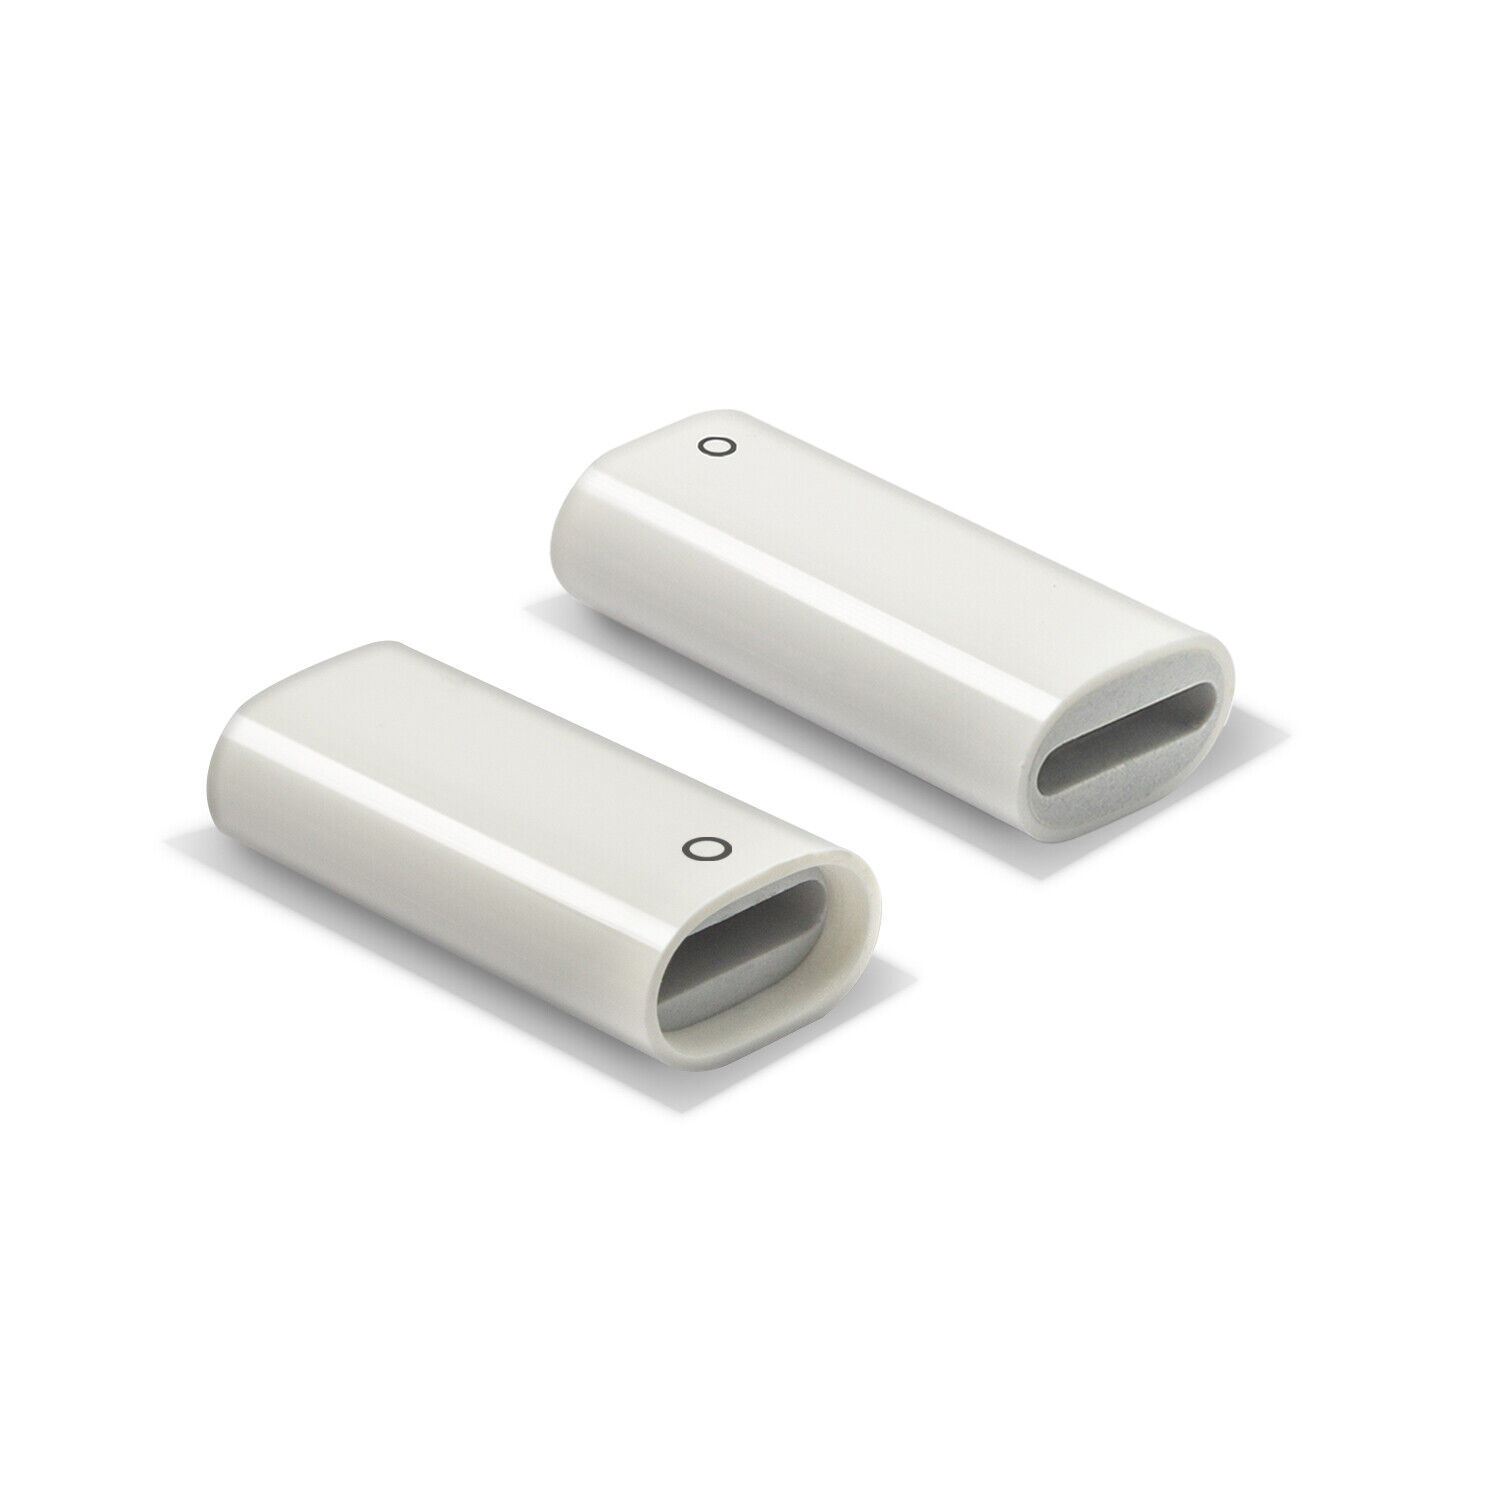 TechMatte Charging Adapter Compatible with Apple Pencil 1st Generation(2 Pack)